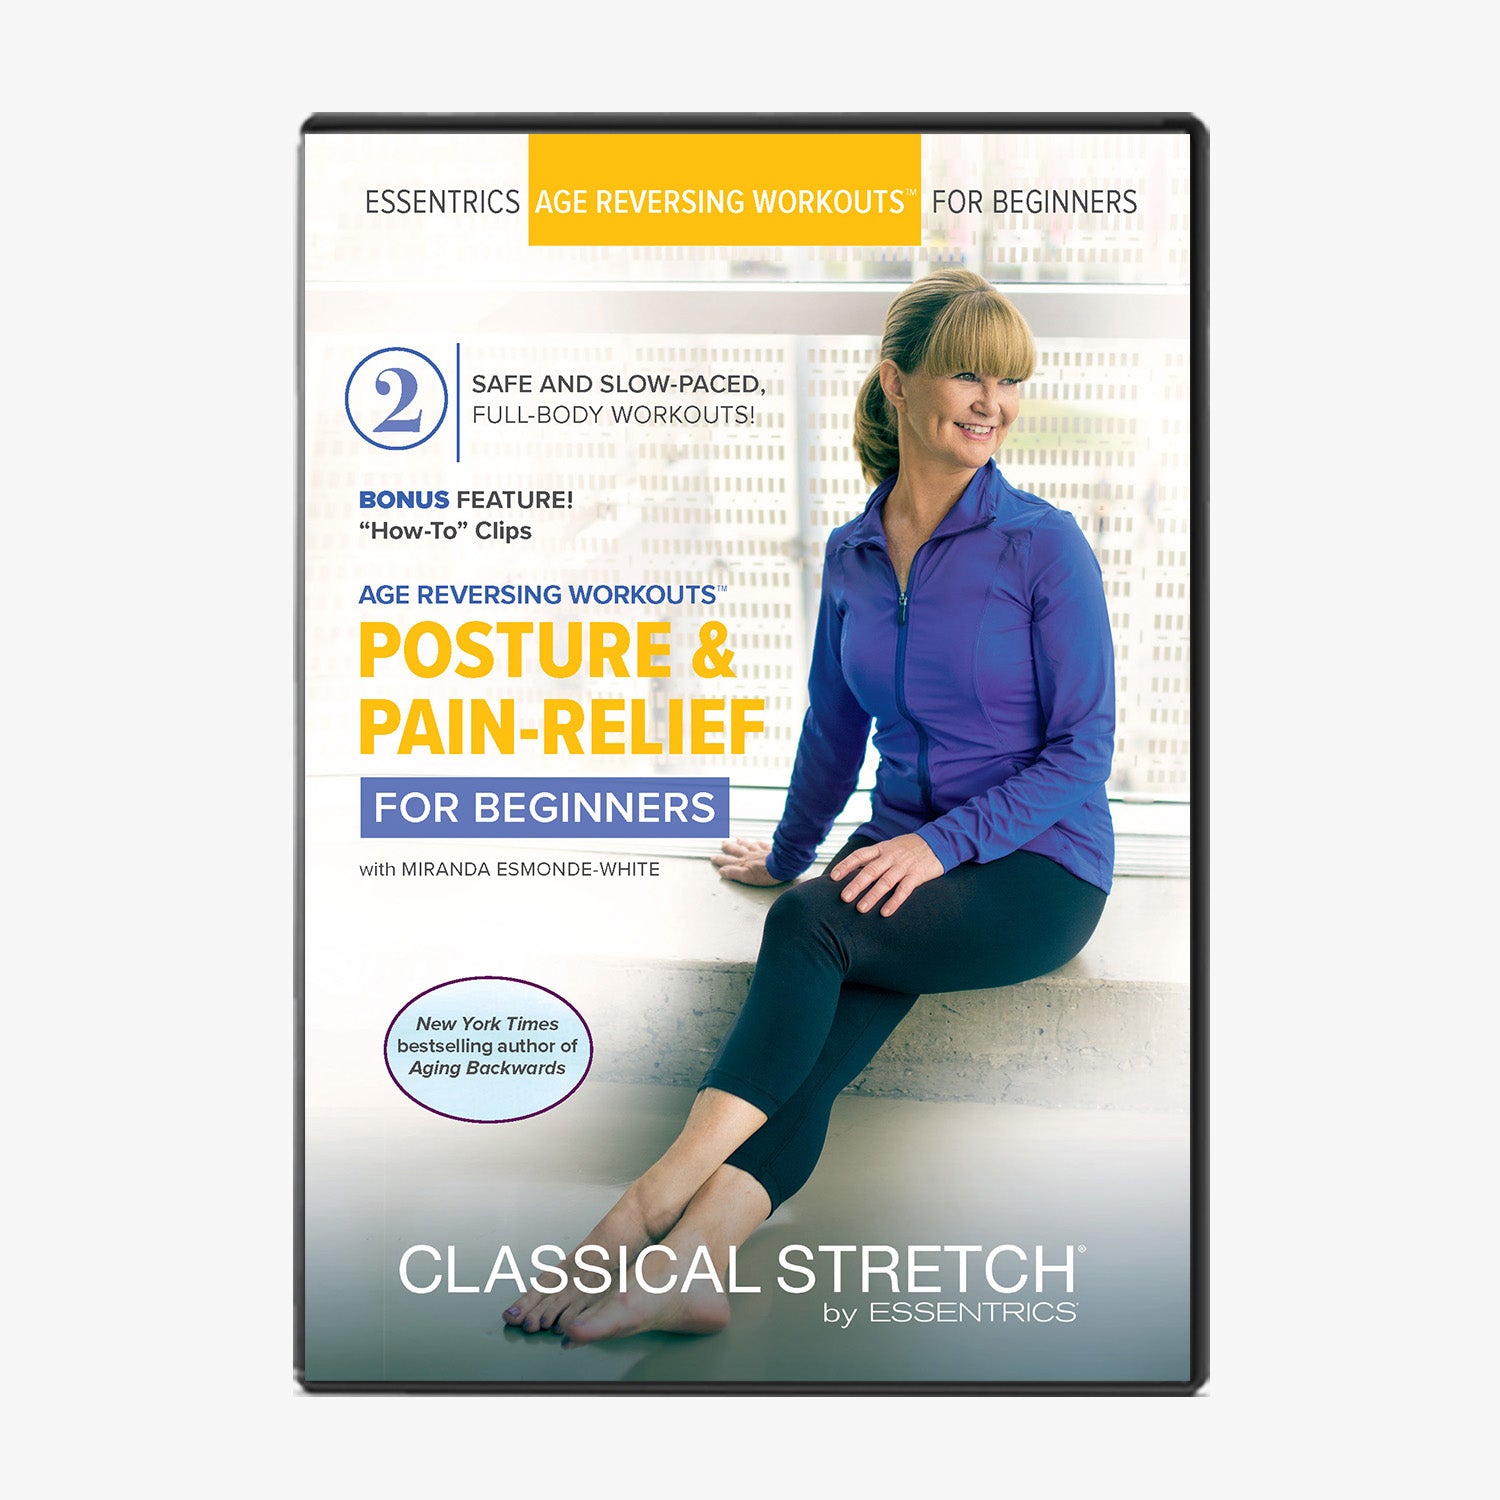 Essentrics Age Reversing Workouts for Beginners: Posture & Pain